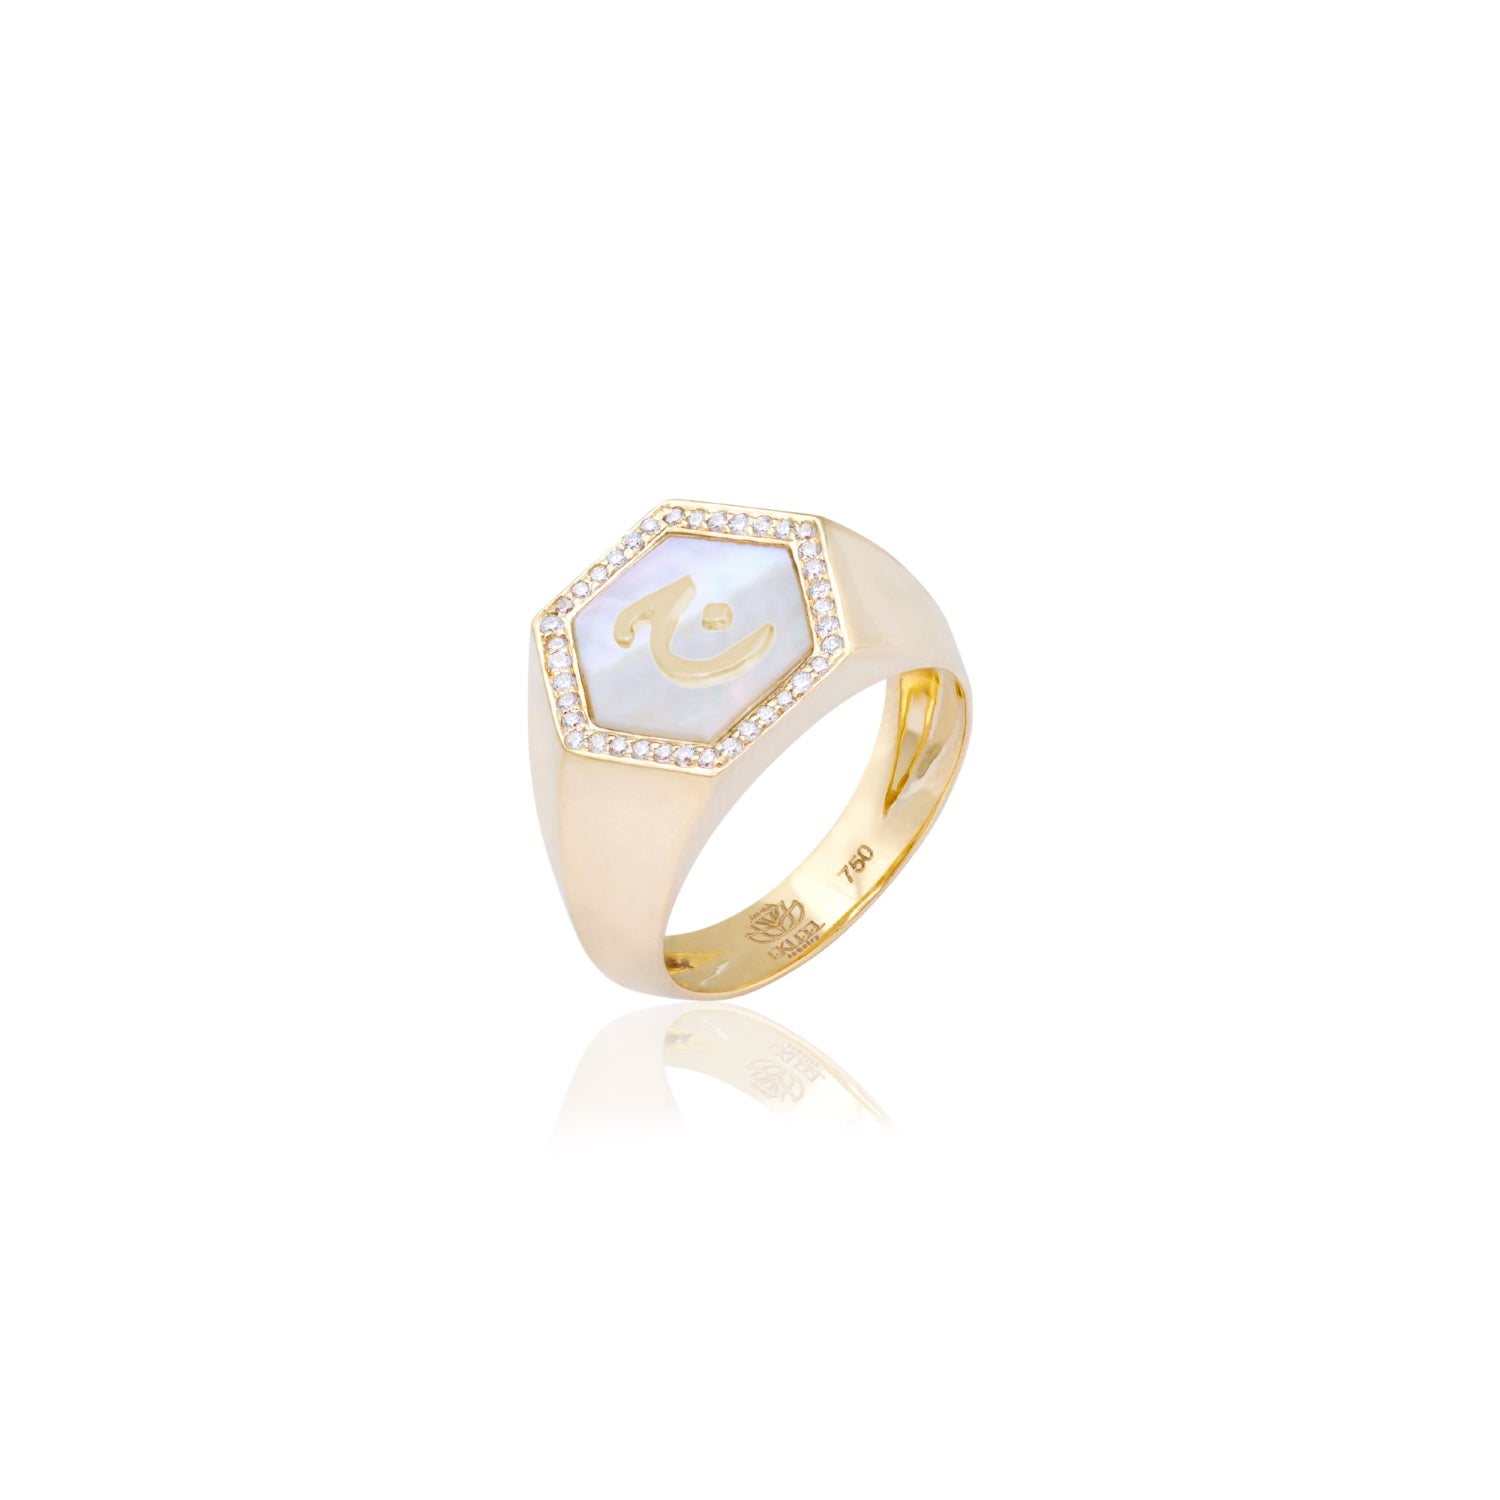 Qamoos 2.0 Letter ج White Mother of Pearl and Diamond Signet Ring in Yellow Gold